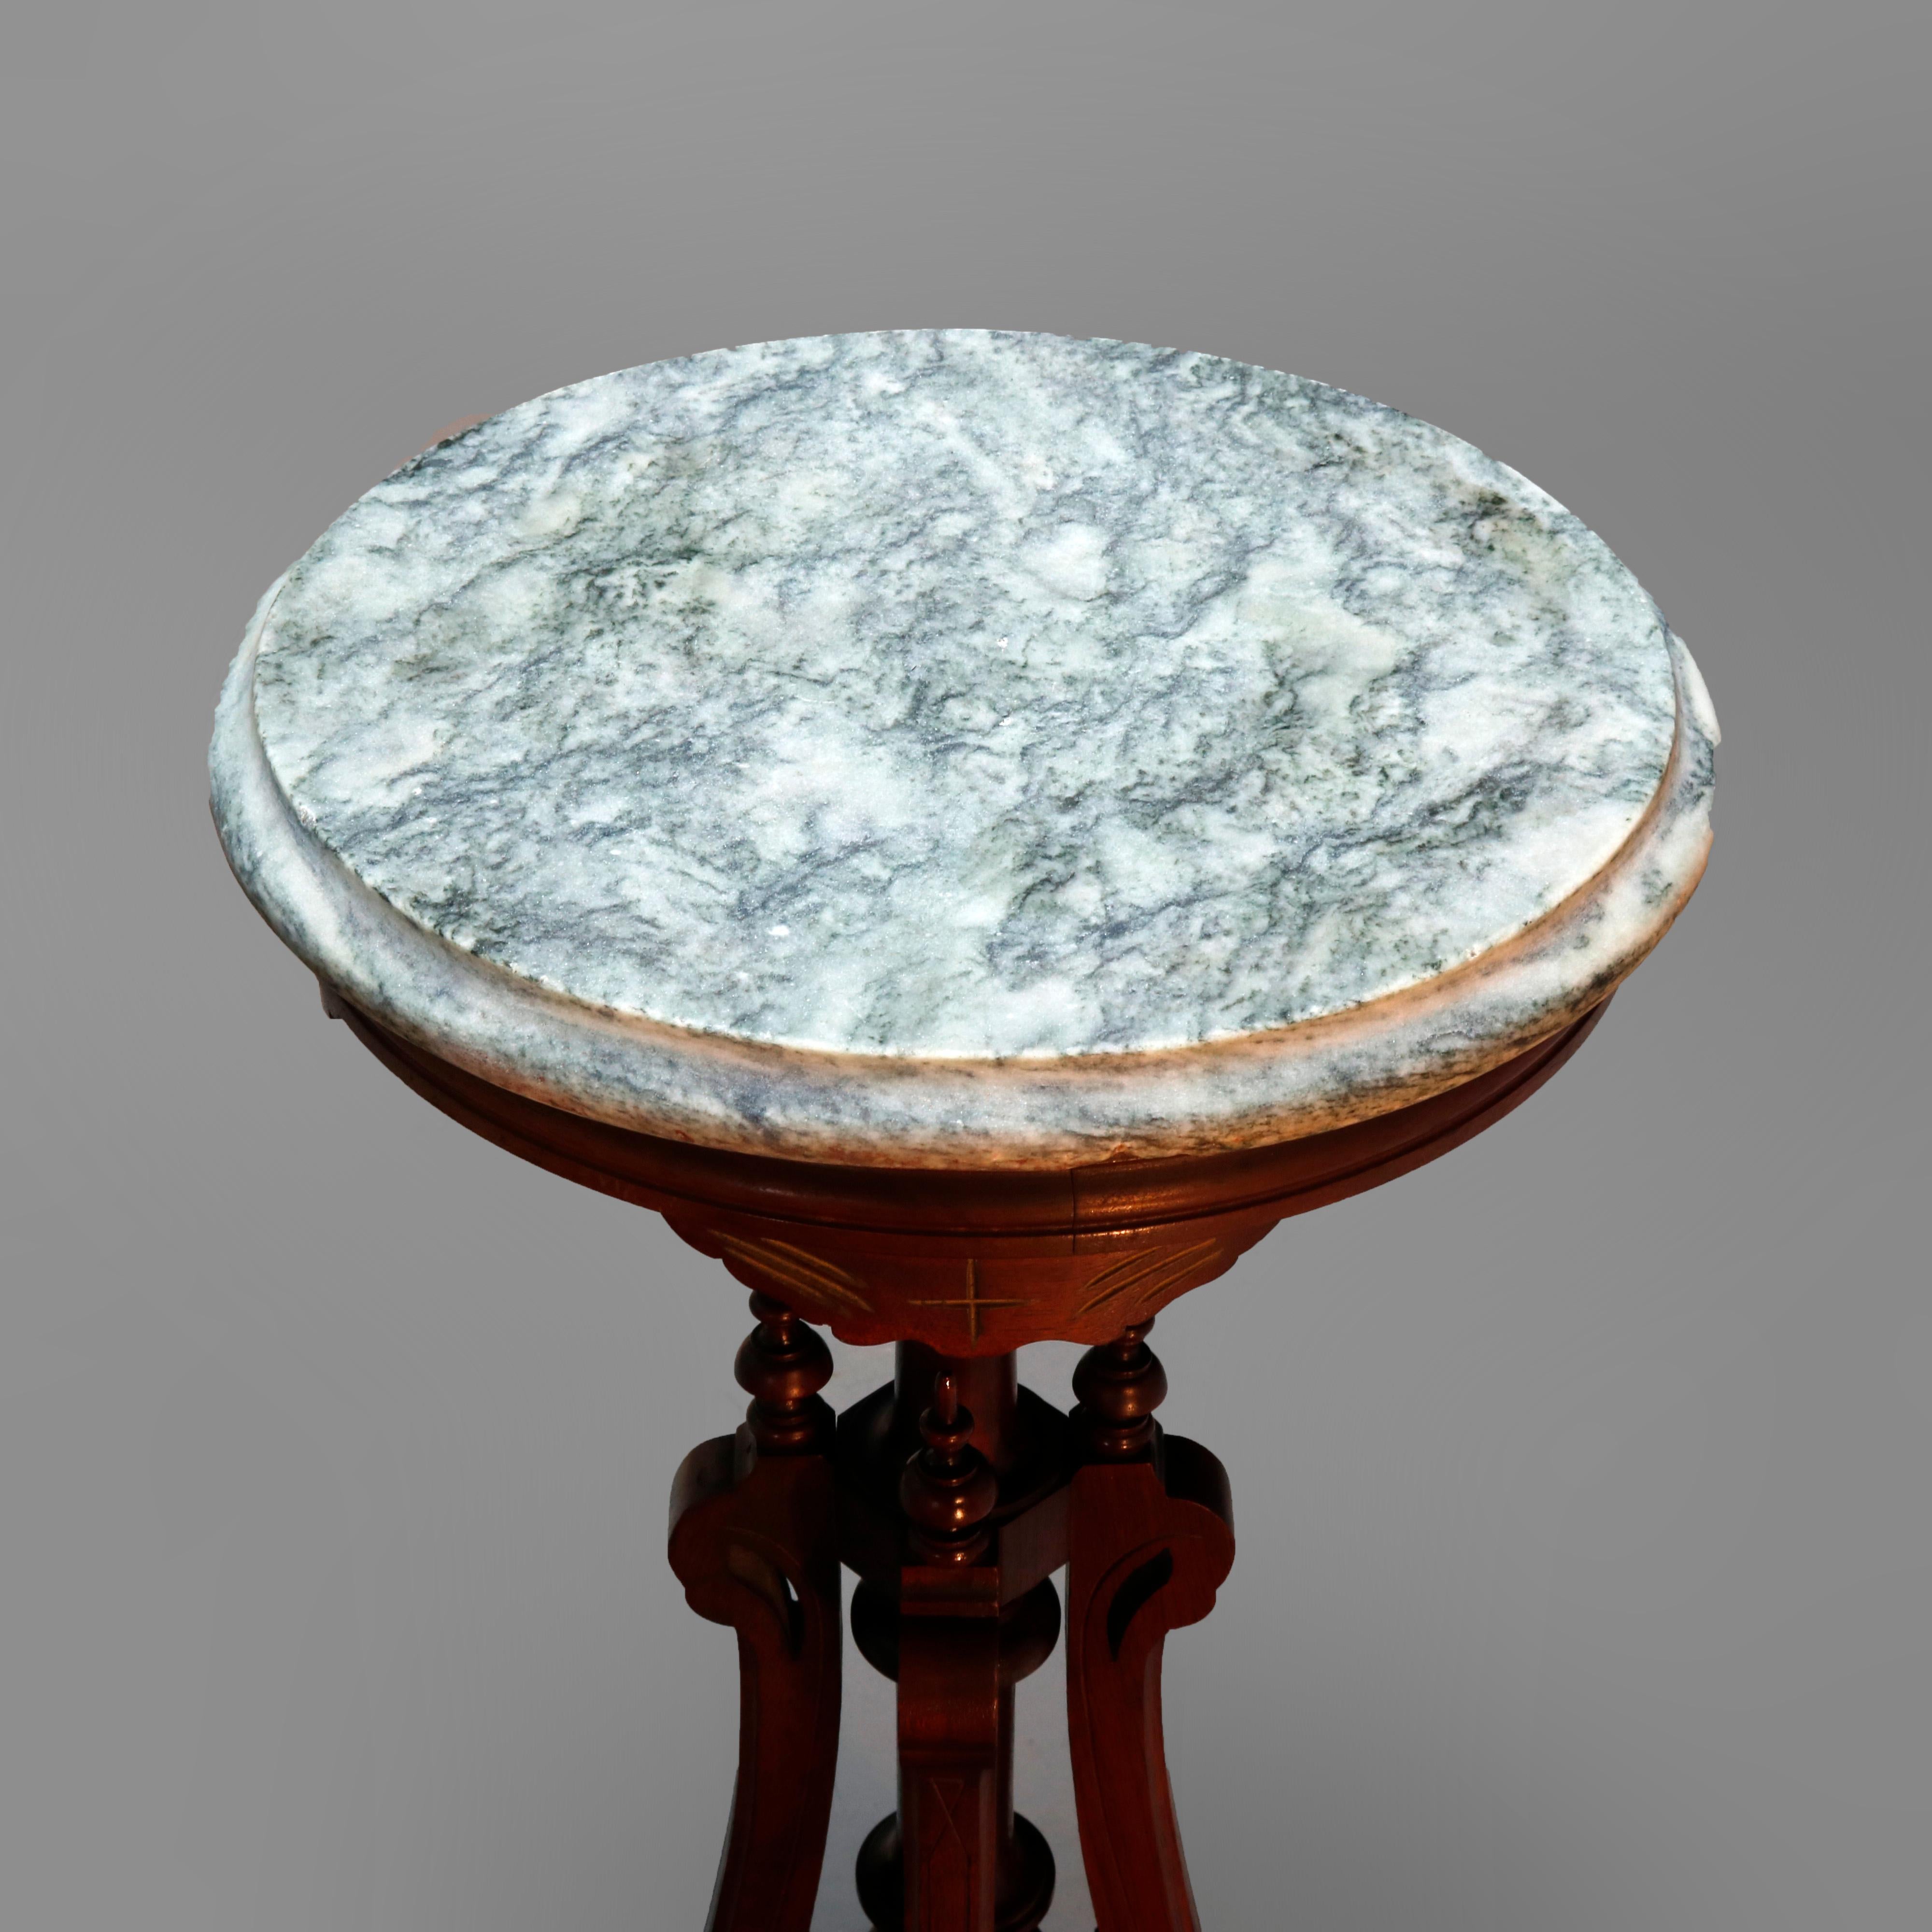 American Antique Renaissance Revival Carved Walnut Marble Top Fern Stand, circa 1890